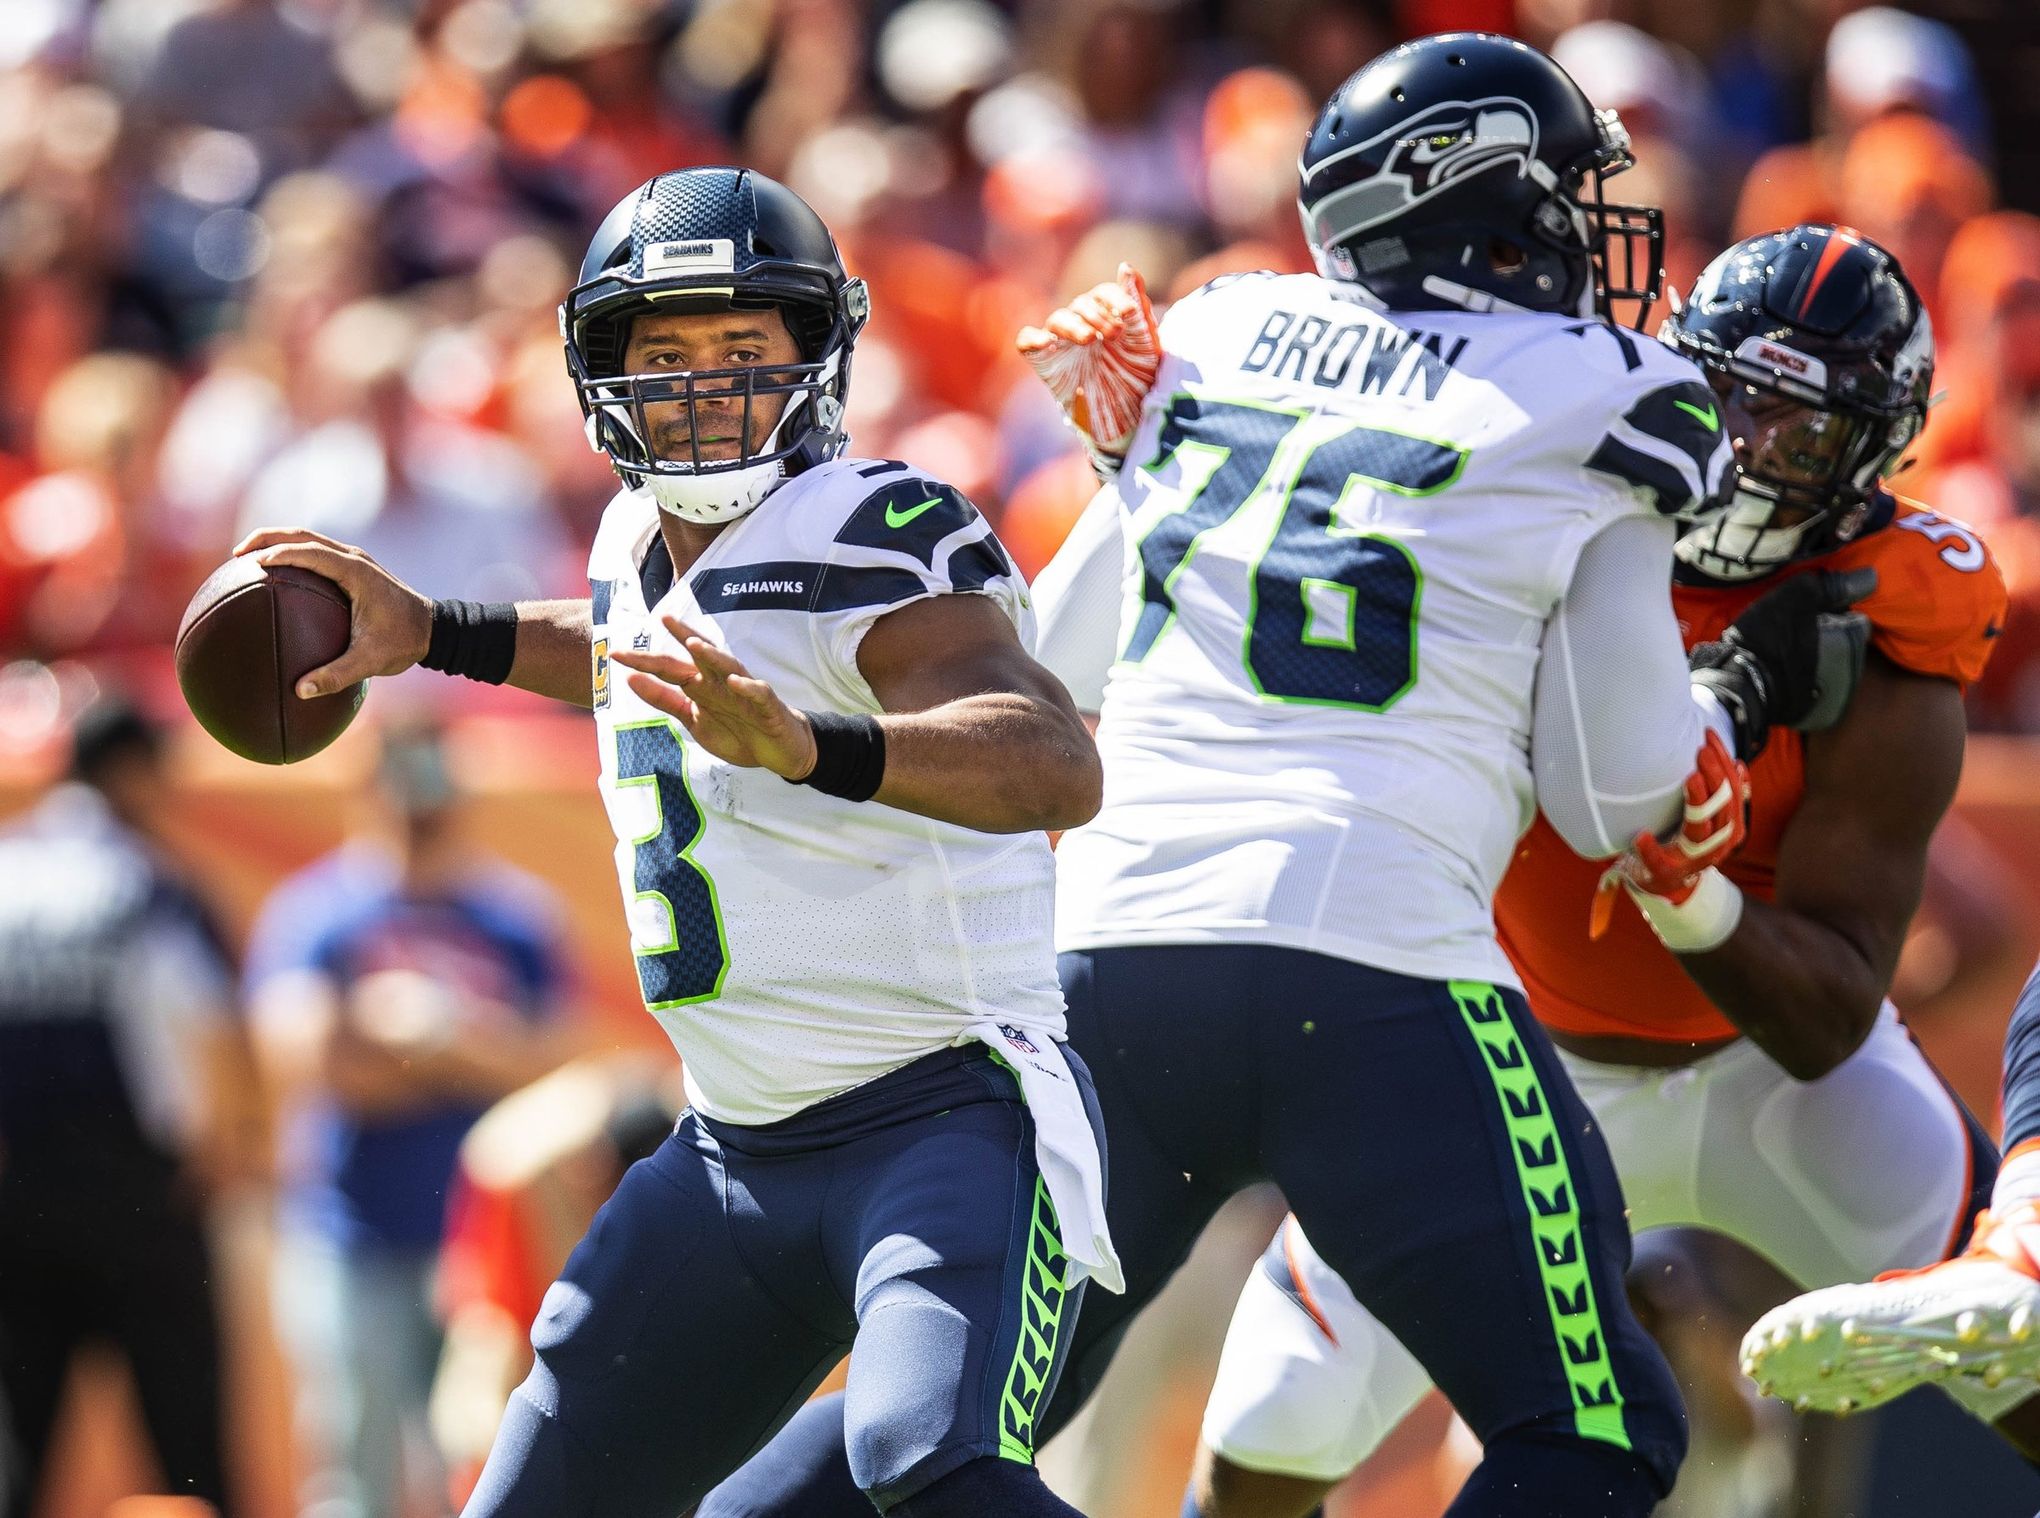 Baseball's curve pushed Russell Wilson to NFL stardom – The Denver Post